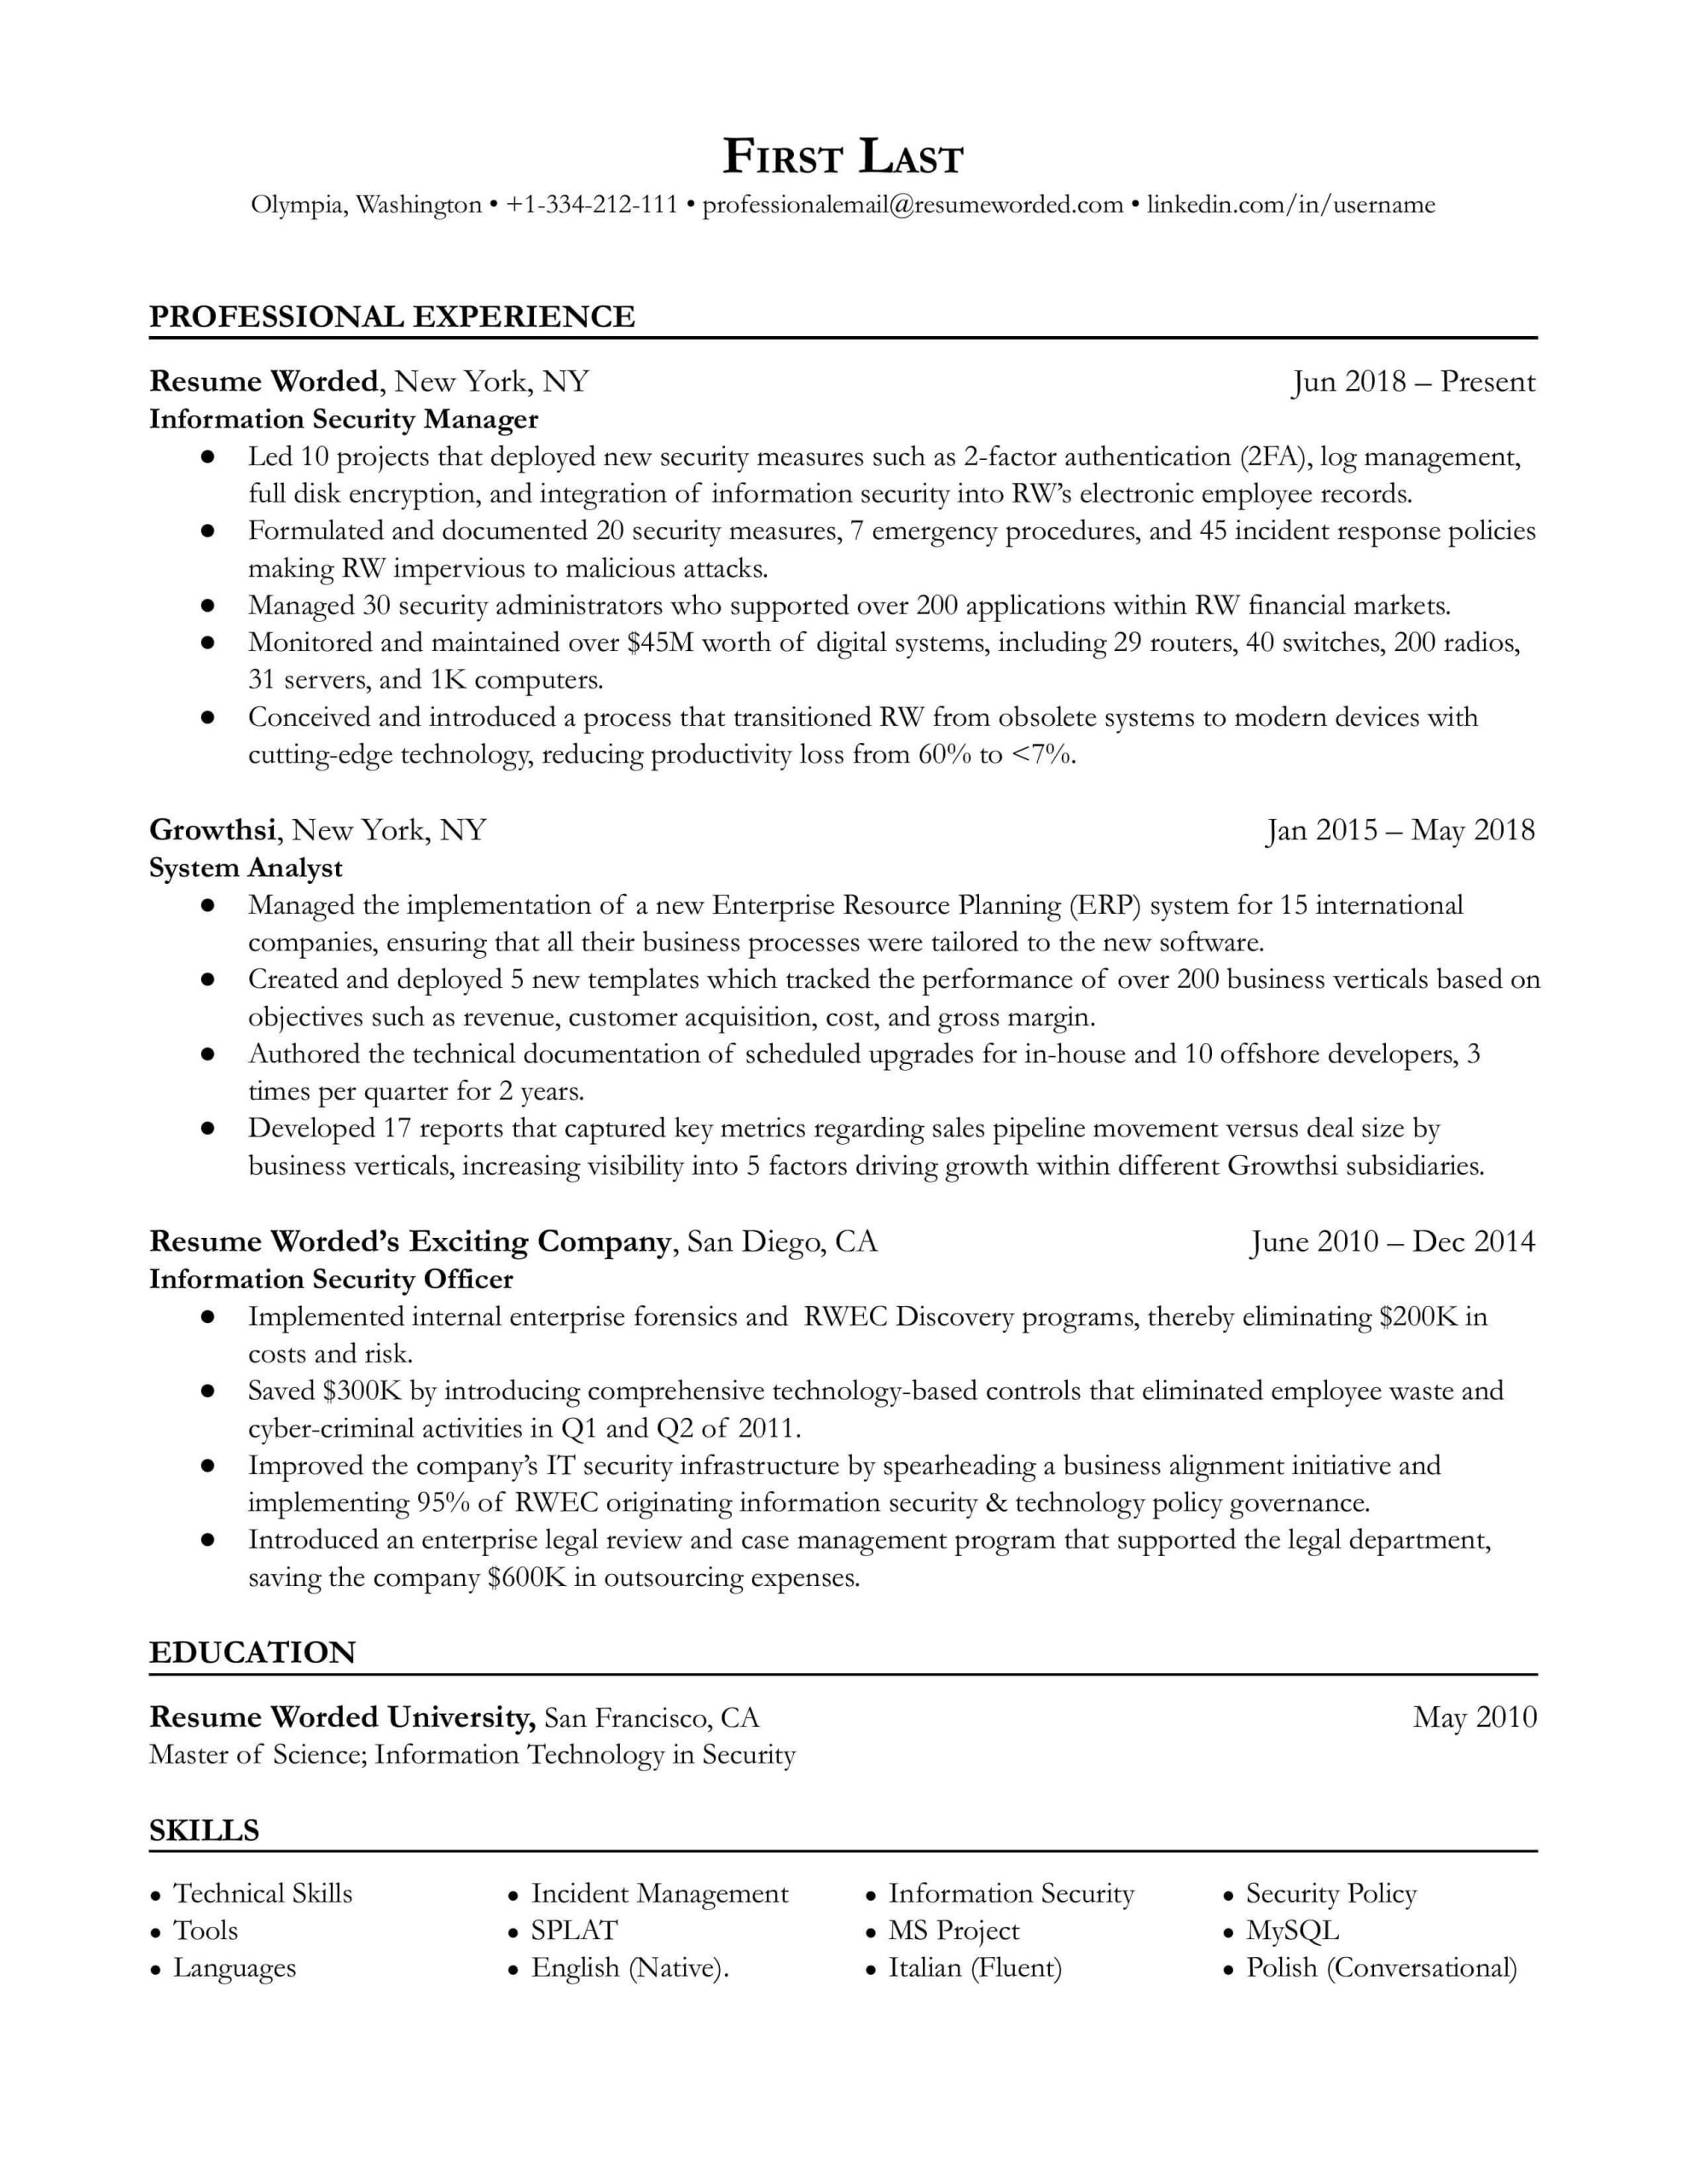 Resume Sample for A I T Technicion Home Automation Security Information Security Manager Resume Example for 2022 Resume Worded